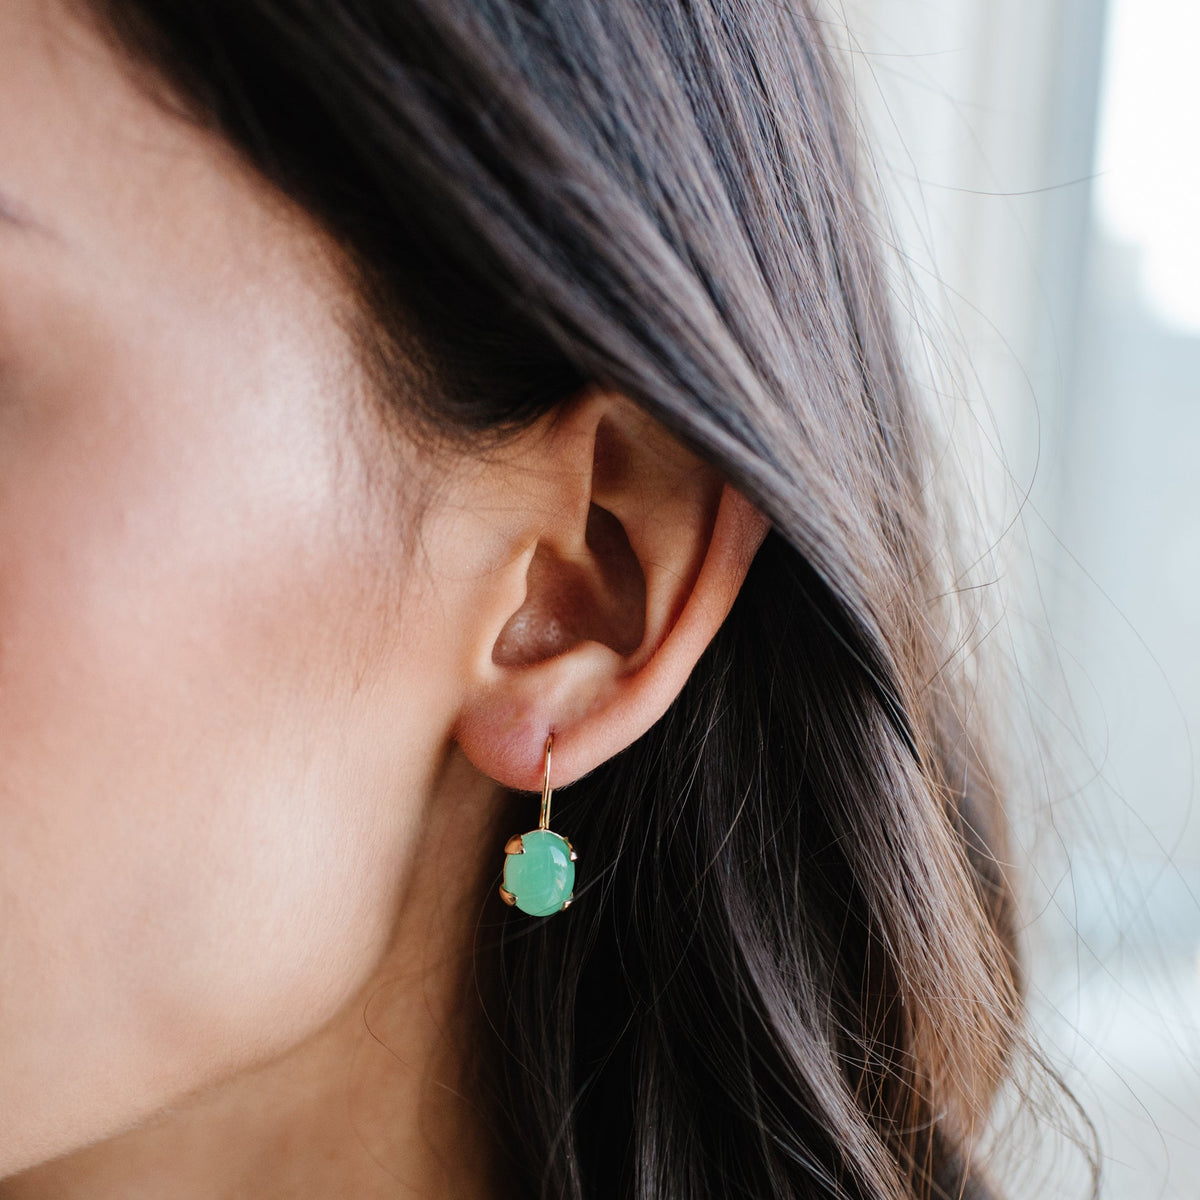 GLEE DROP EARRINGS - CHRYSOPRASE &amp; GOLD - SO PRETTY CARA COTTER